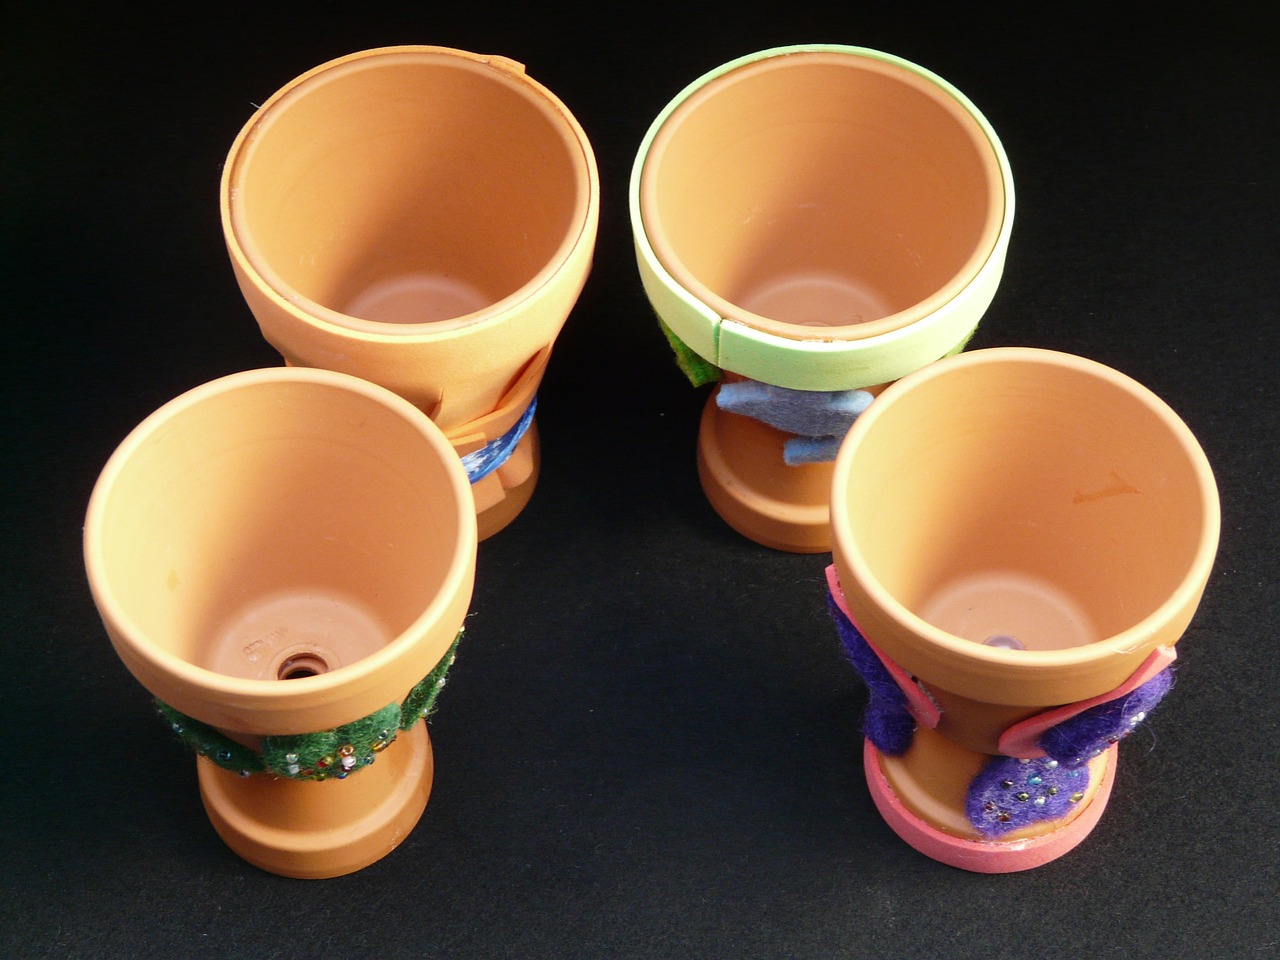 egg cups homemade do it yourself free photo